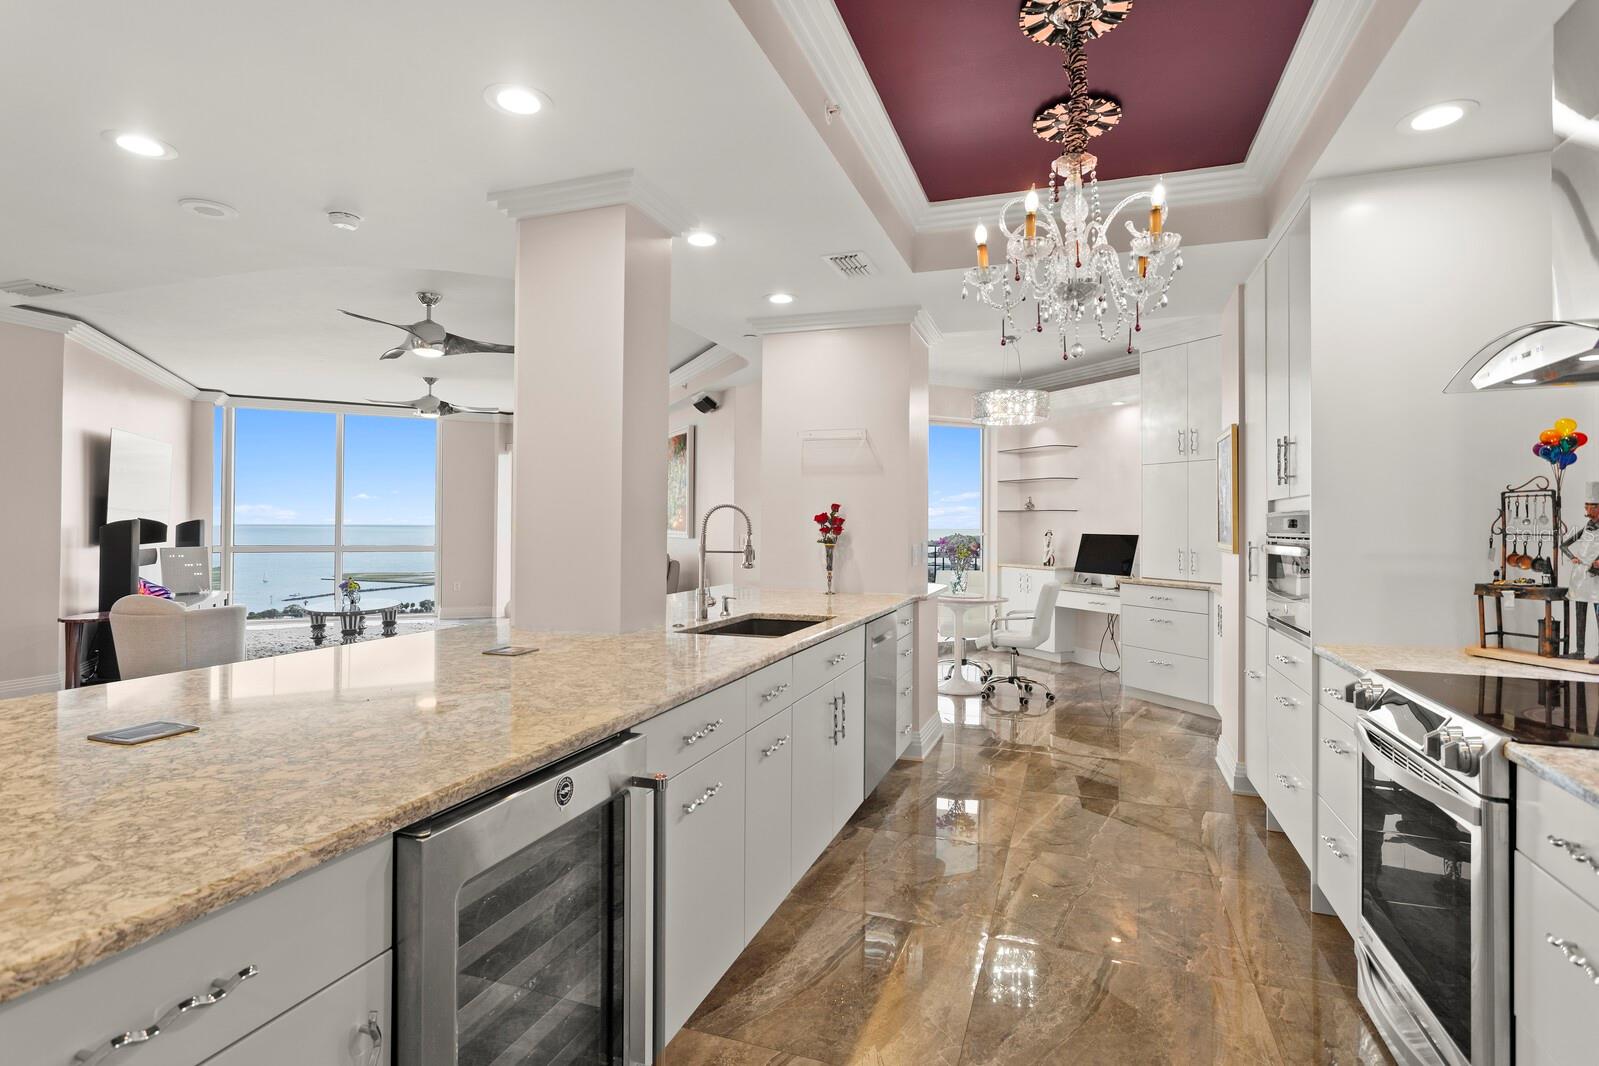 Gourmet Kitchen has stainless appliances, and an abundance of storage.